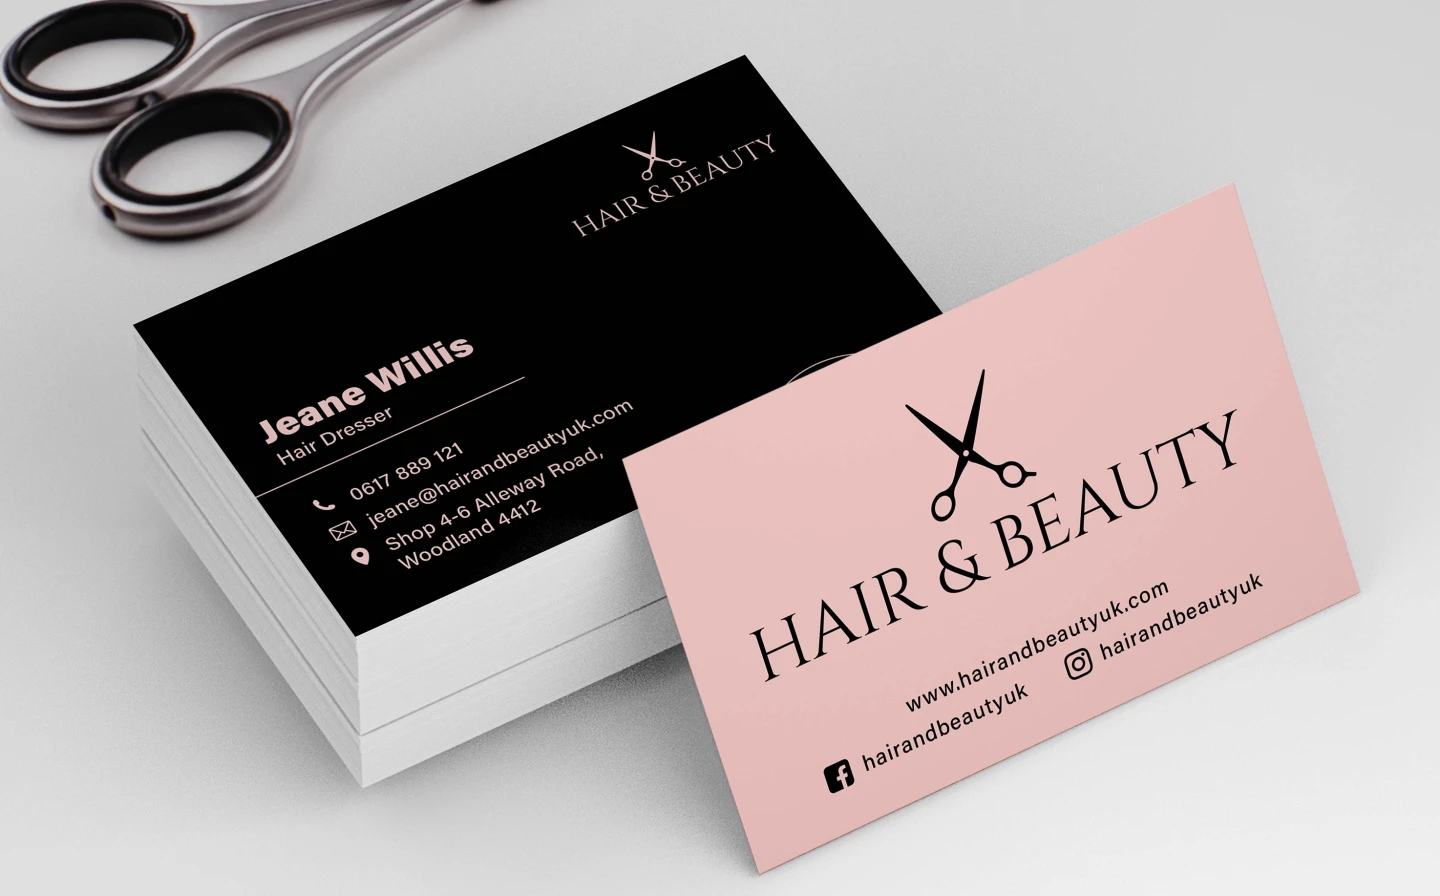 Beauty&Spa_HairSalon_Essential450gsmBusinessCards_1